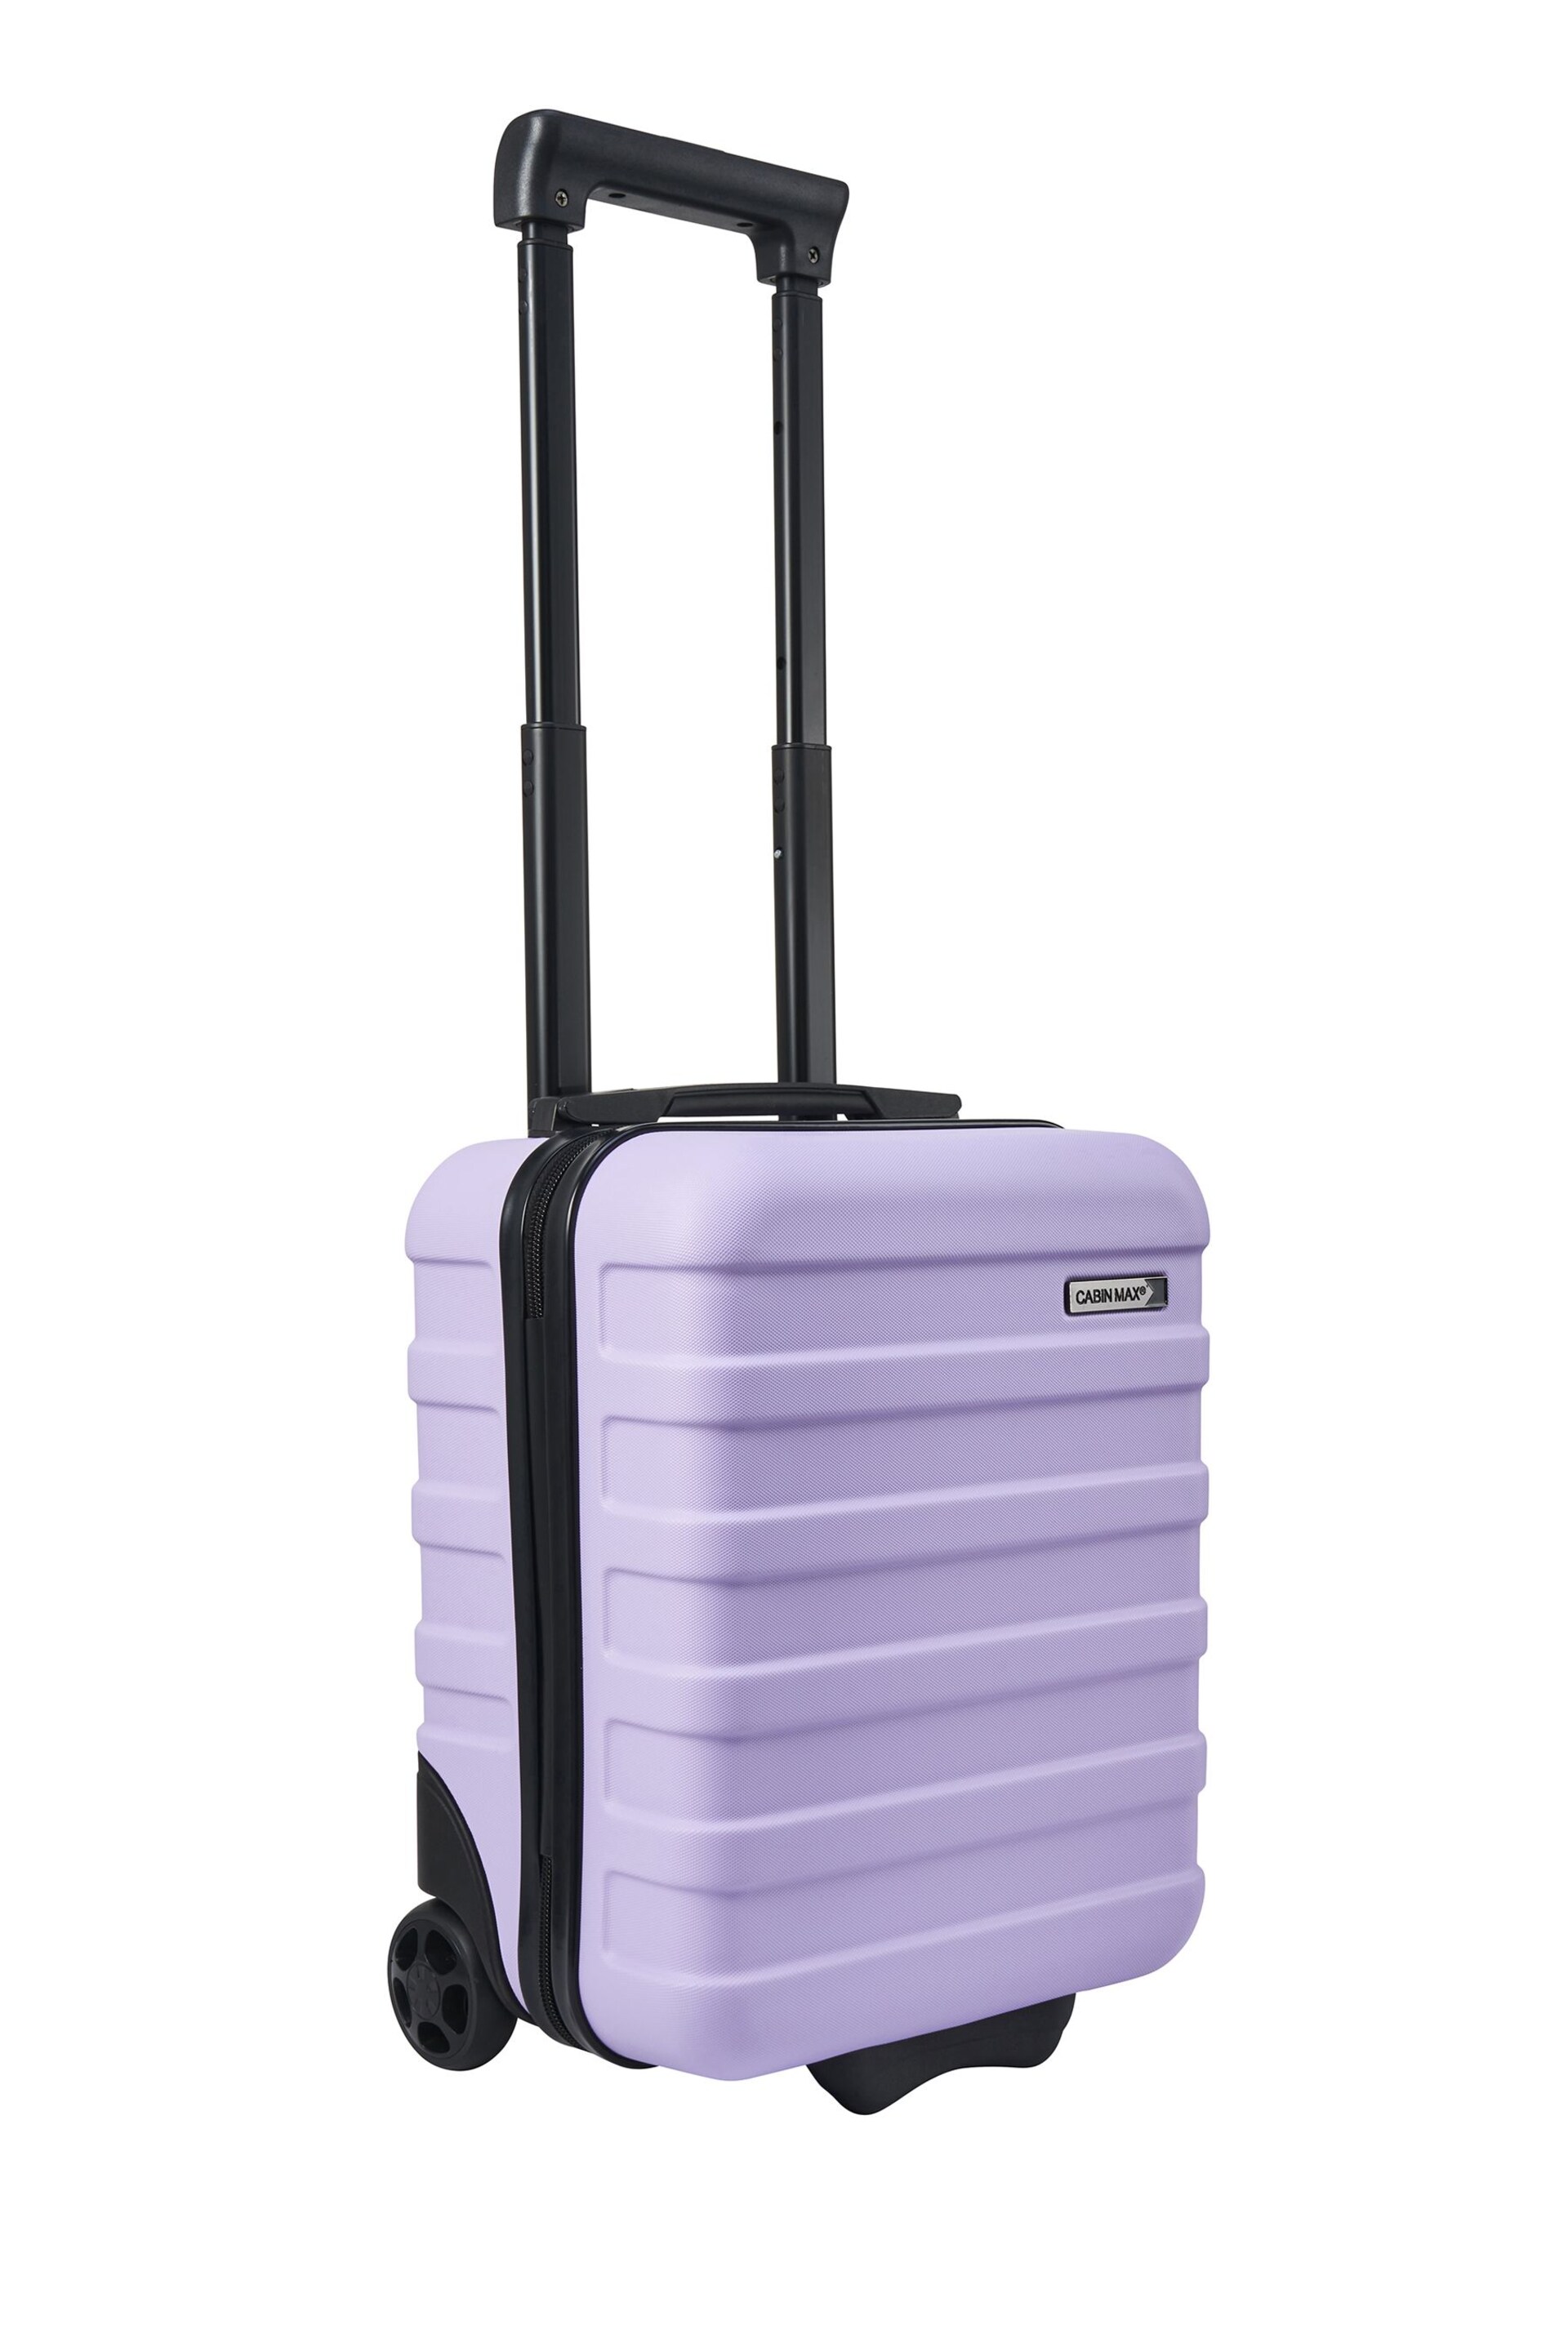 Cabin Max Anode Two Wheel Carry On Underseat 45cm Suitcase - Image 1 of 6